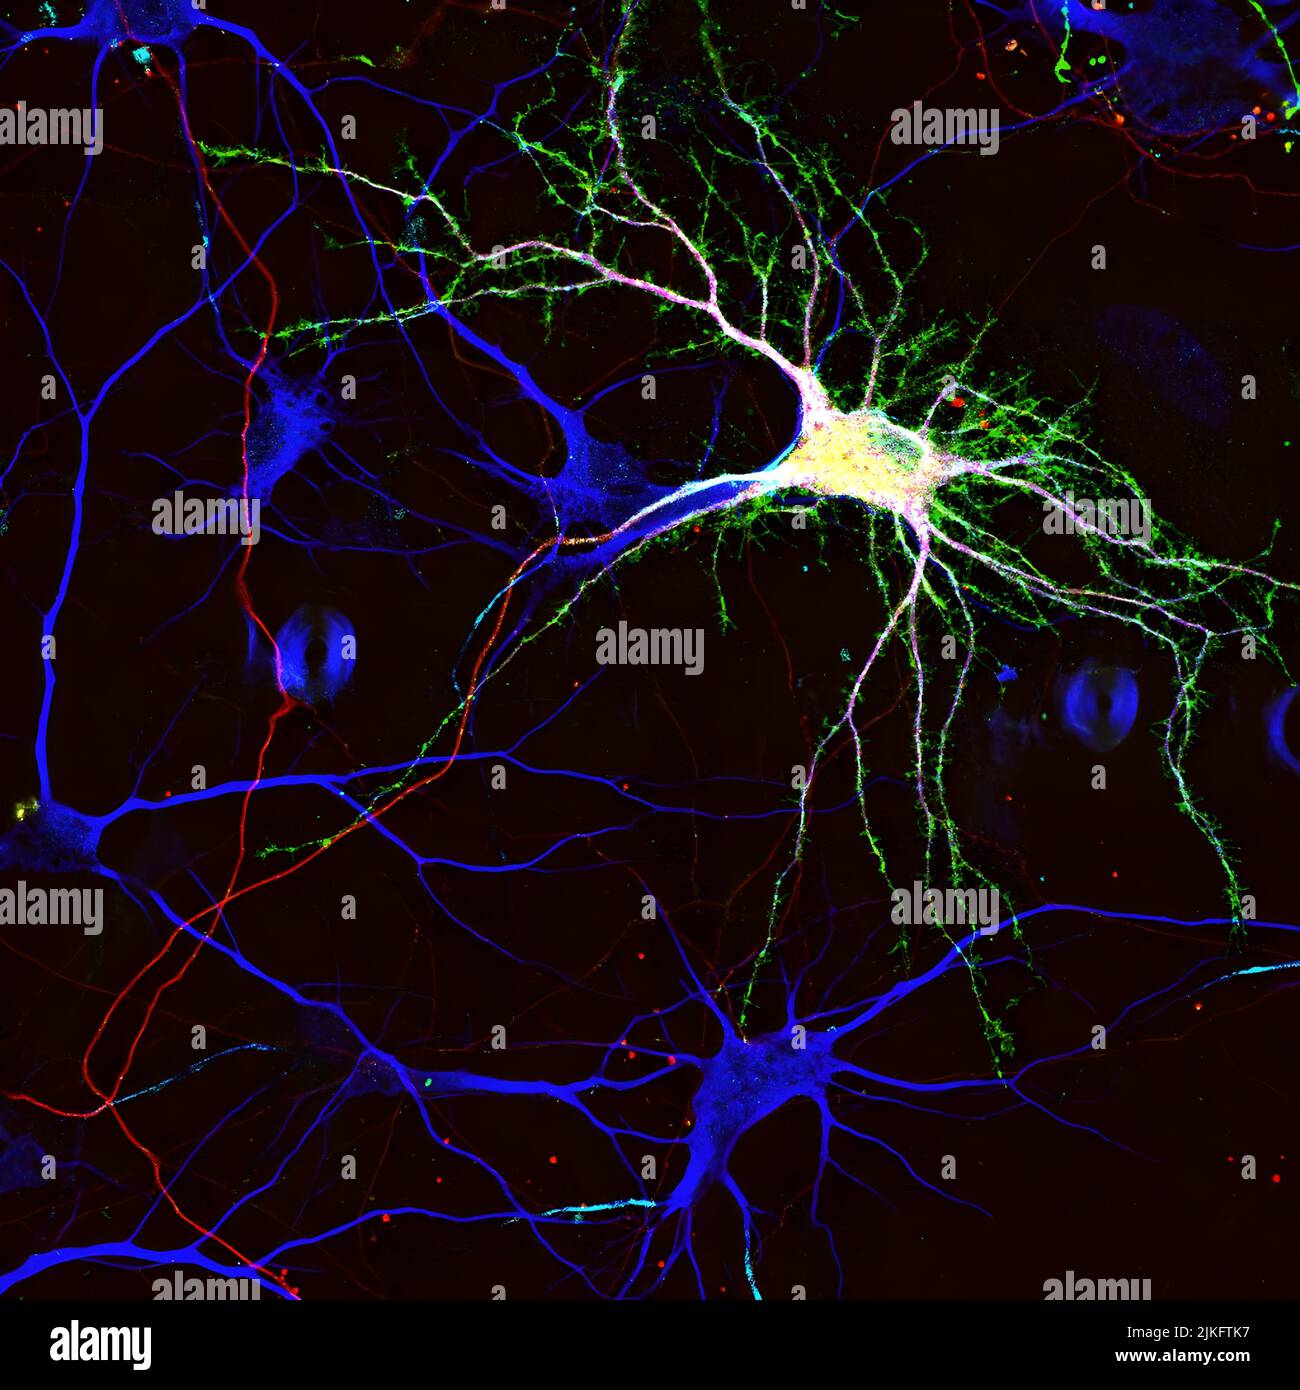 Nipah virus envelope glycoprotein F (NivF) is labeled green in hippocampal neurons. The dendrites are characterized in blue and the axon in red. Stock Photo